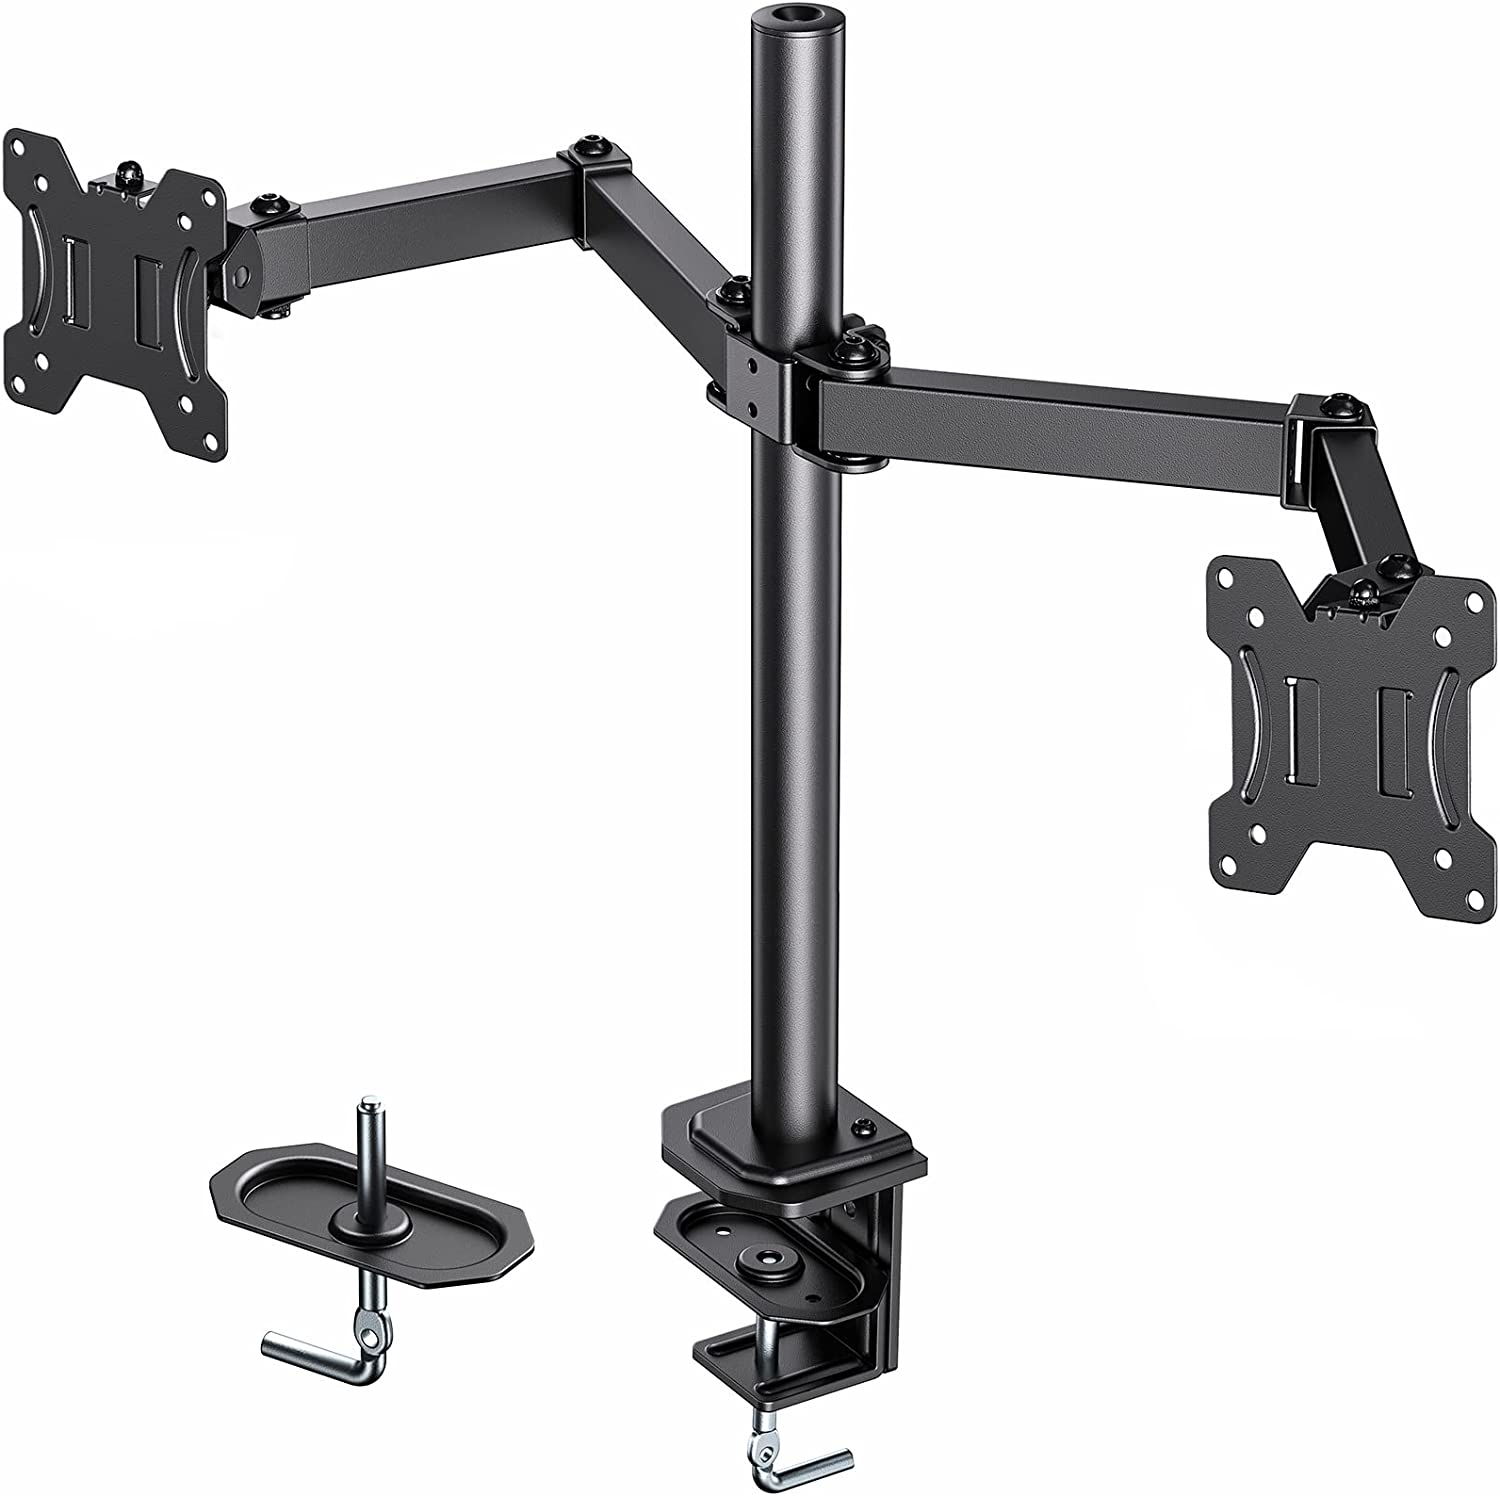 Huanuo Dual Monitor Stand w/ C Clamp (for 13 to 27" Monitors) $18.25 + Free Shipping